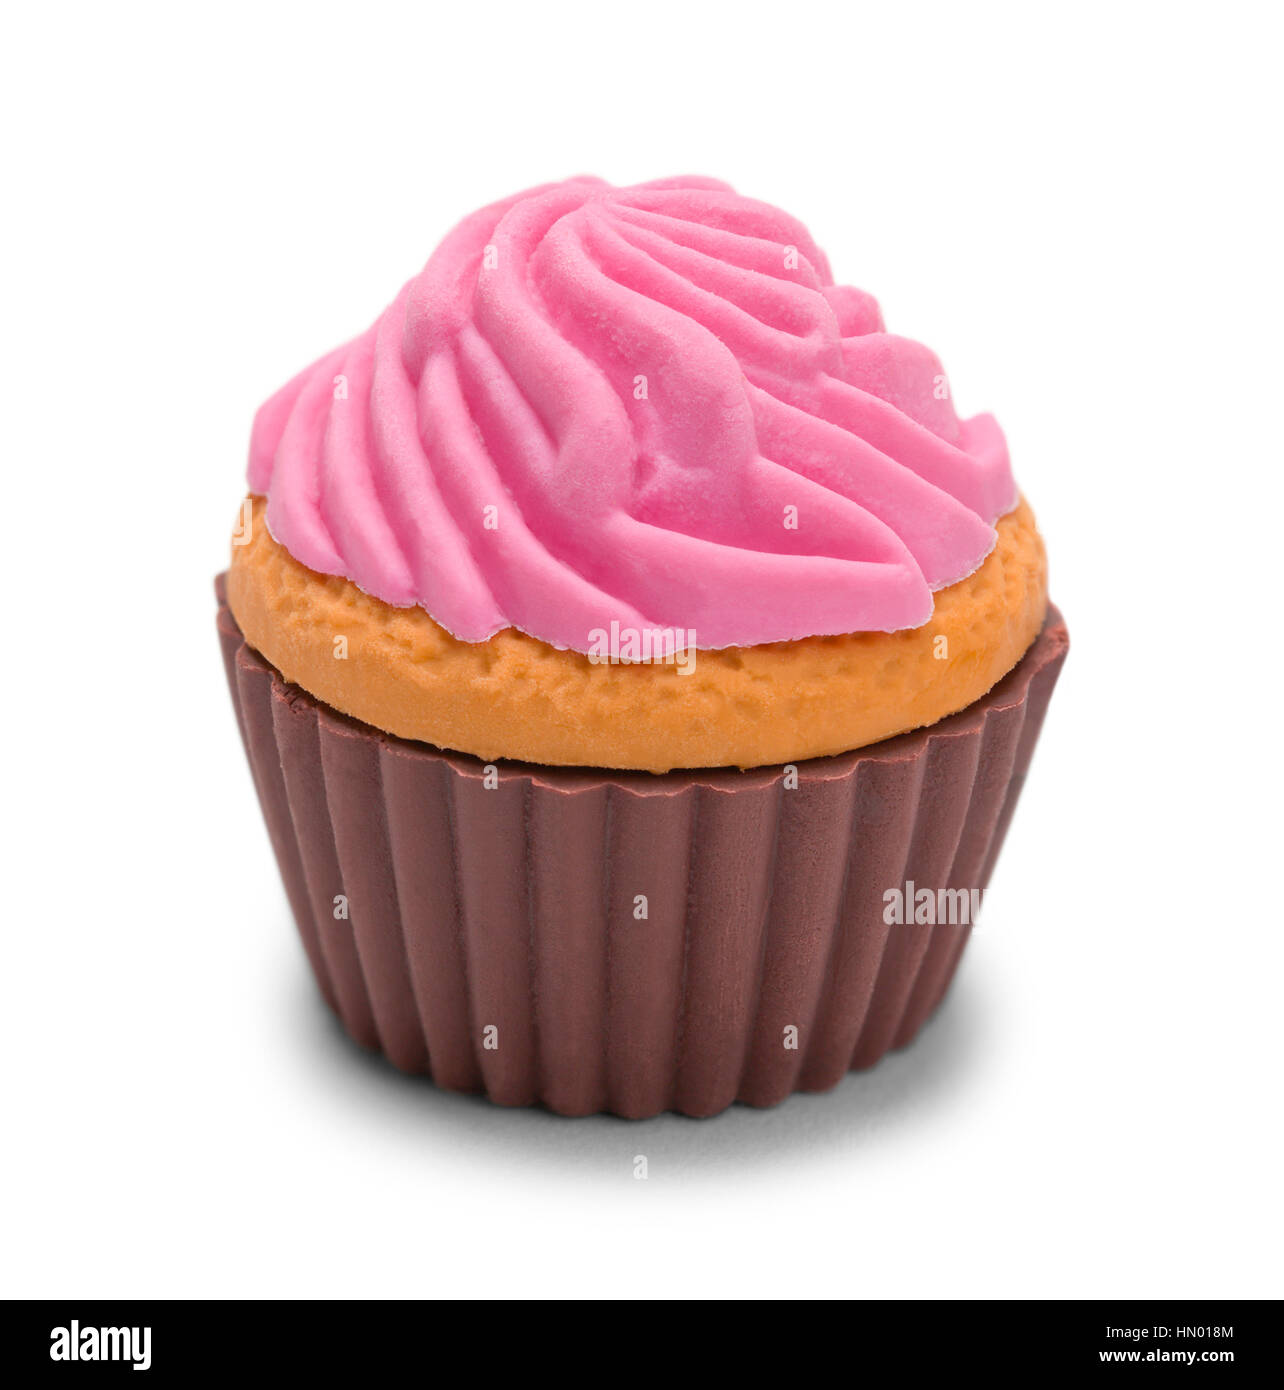 Pink Rubber Eraser Cupcake Isolated on White Background. Stock Photo